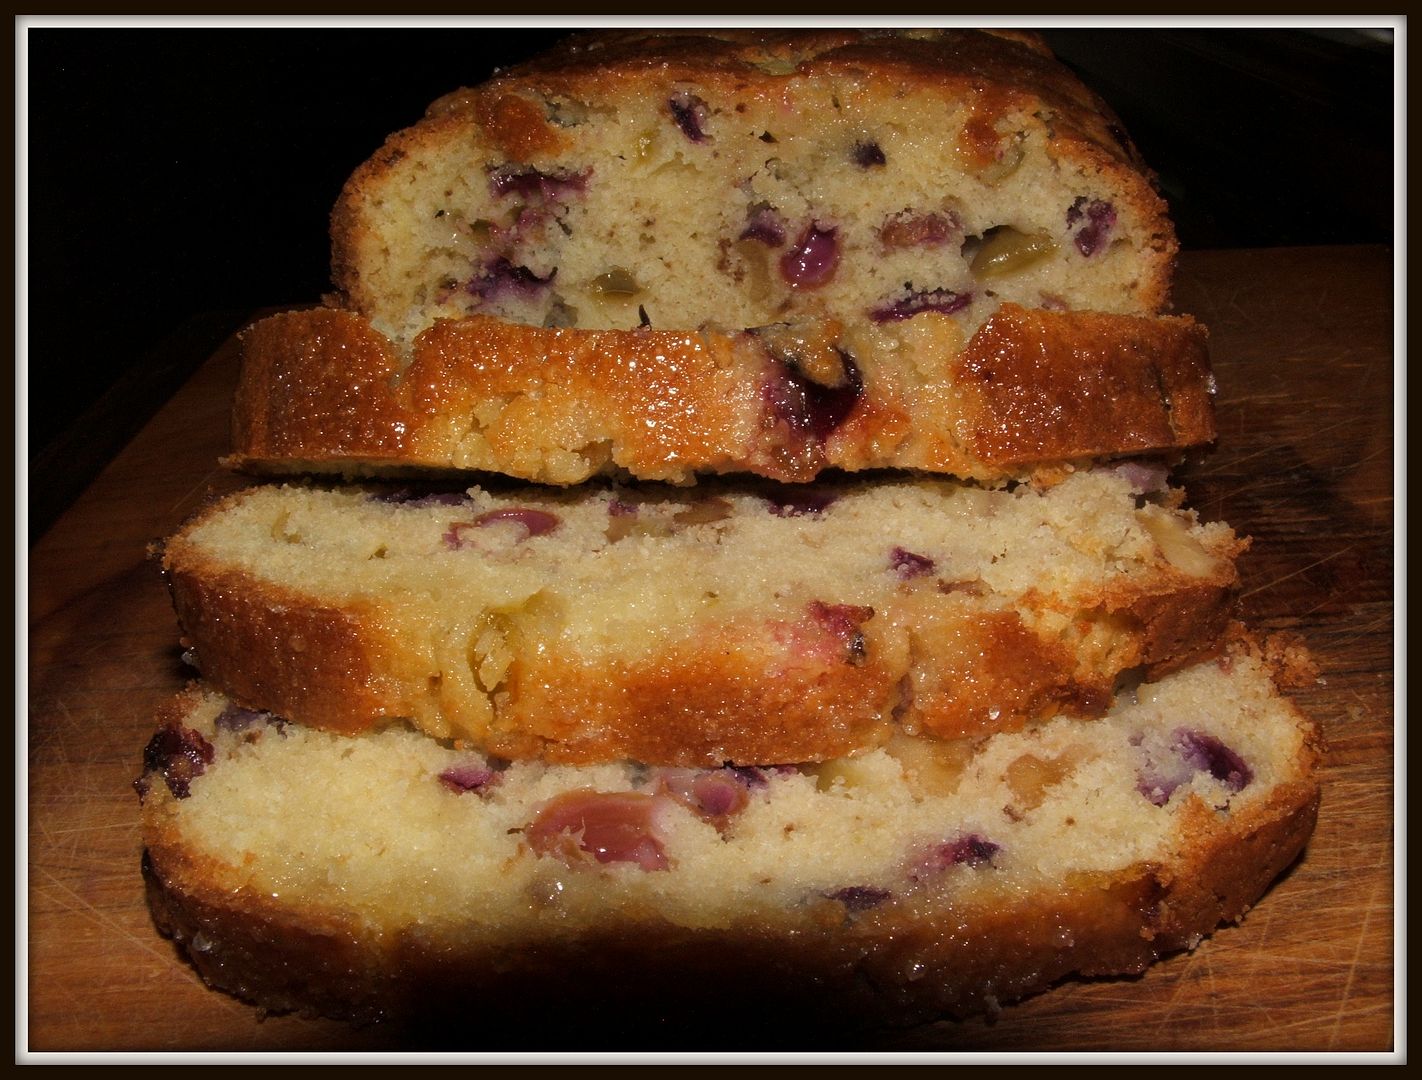 Concord Grape Bread by Angie Ouellette-Tower for godsgrowinggarden.com photo 013_zpscfd9275f.jpg